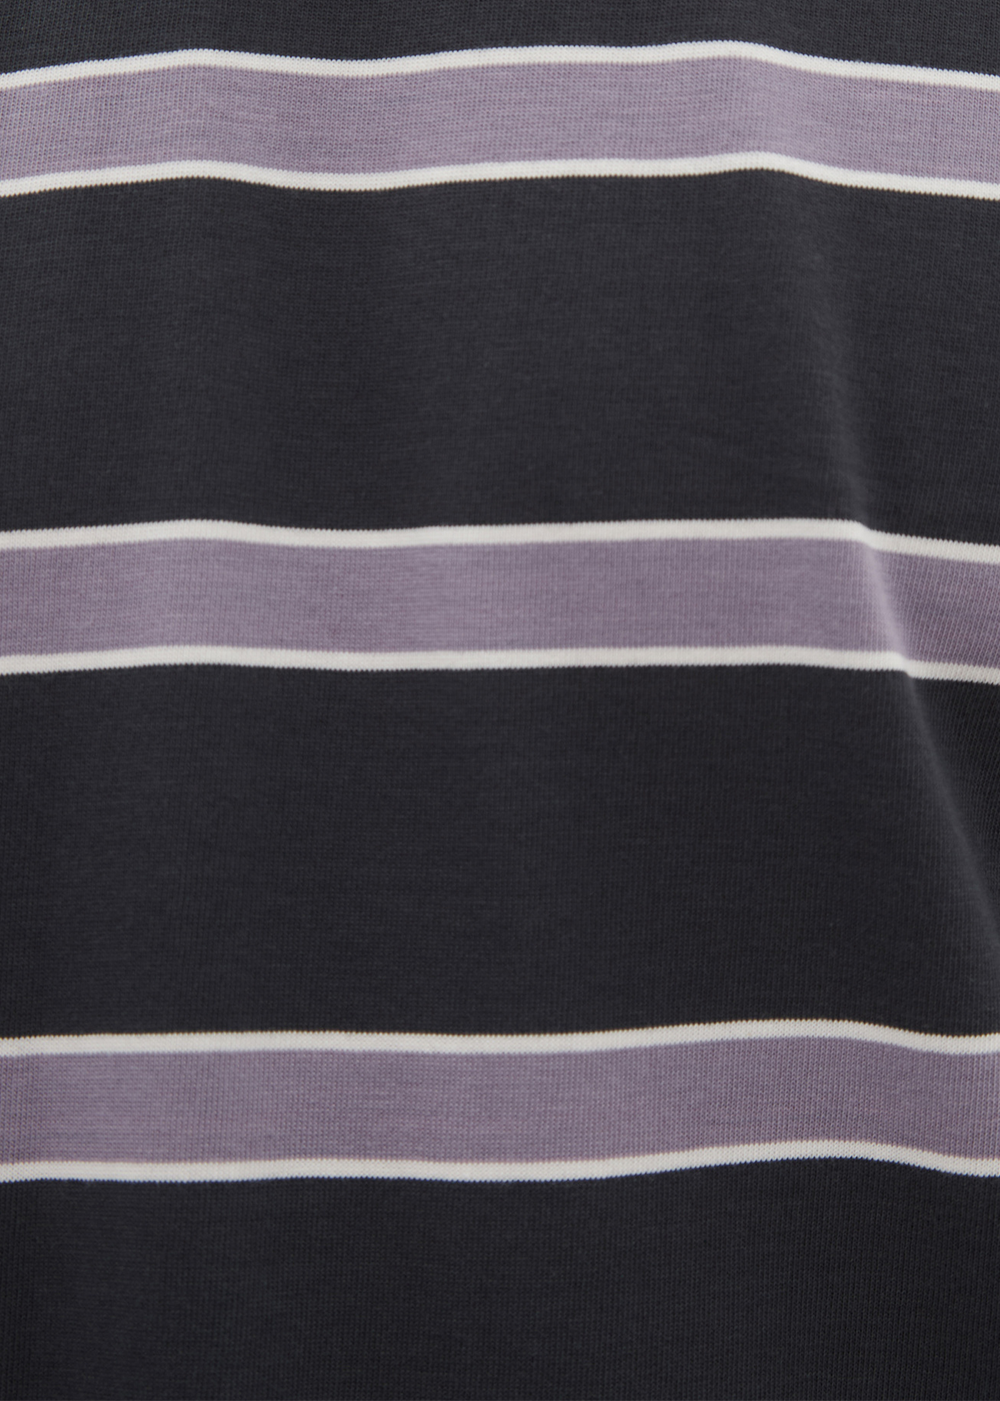 Close up view of the Johannes Organic Multicolor Striped T-Shirt by Norse Projects in Battleship Grey.